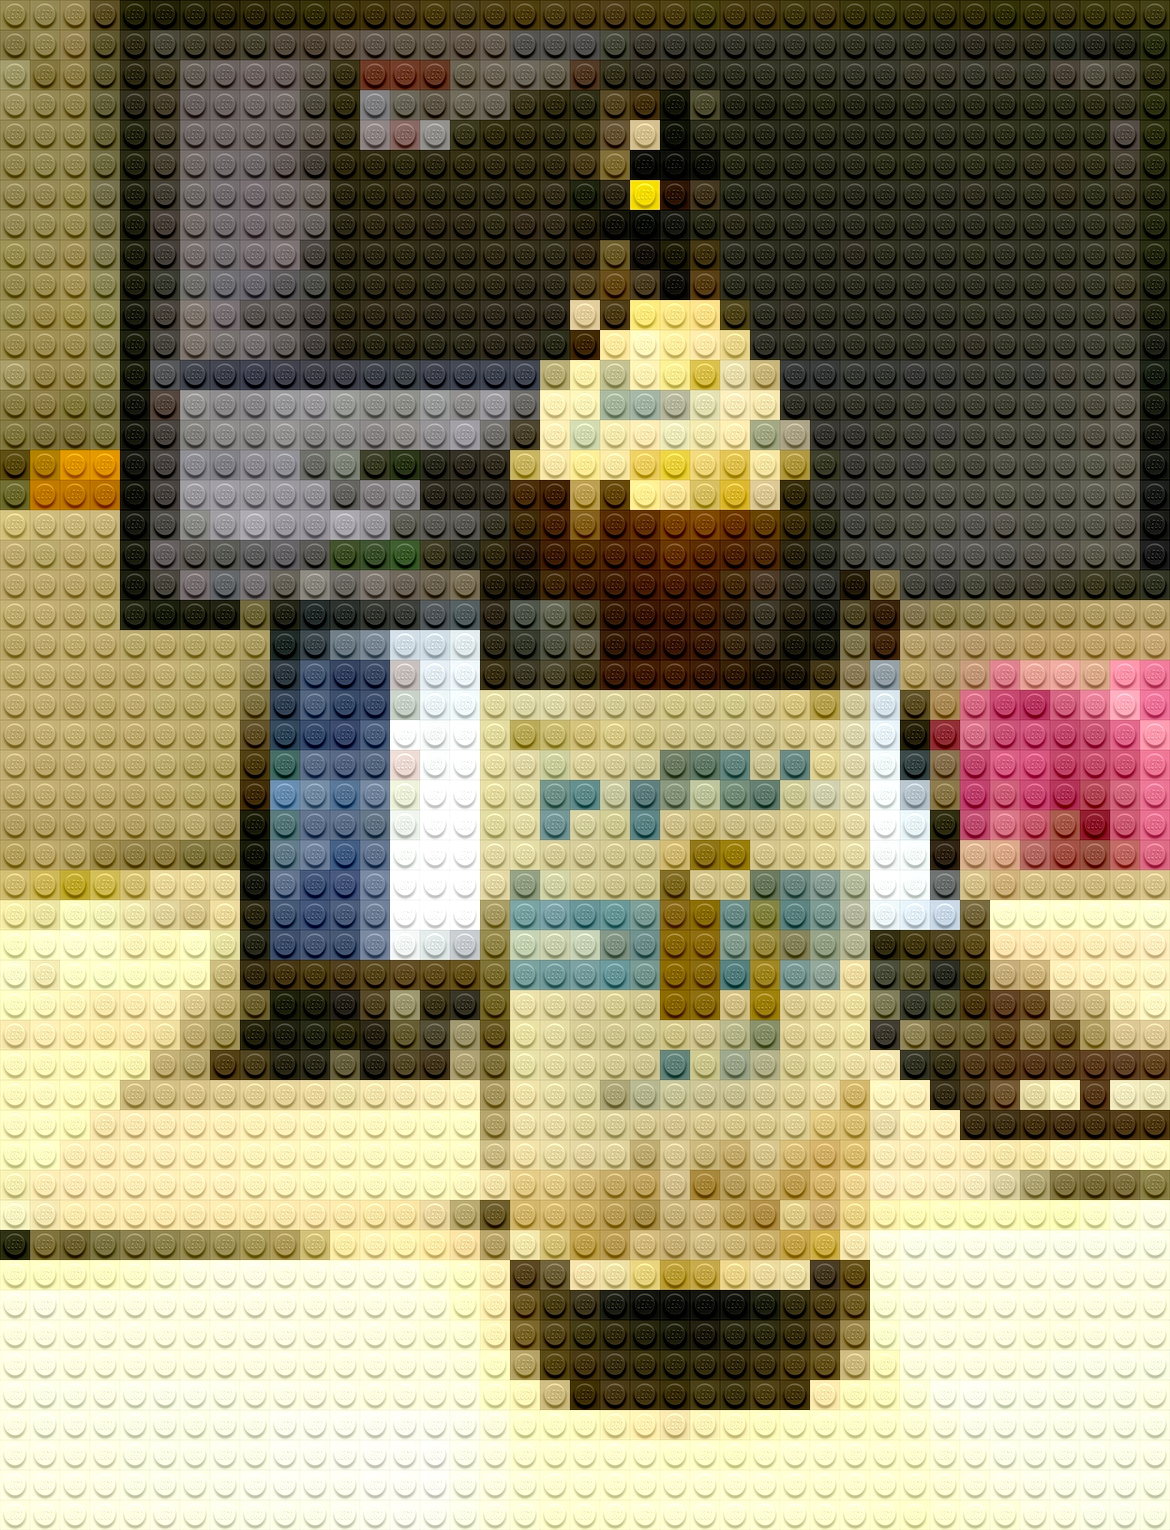 the picture of a beer bottle looking like it was made out of lego